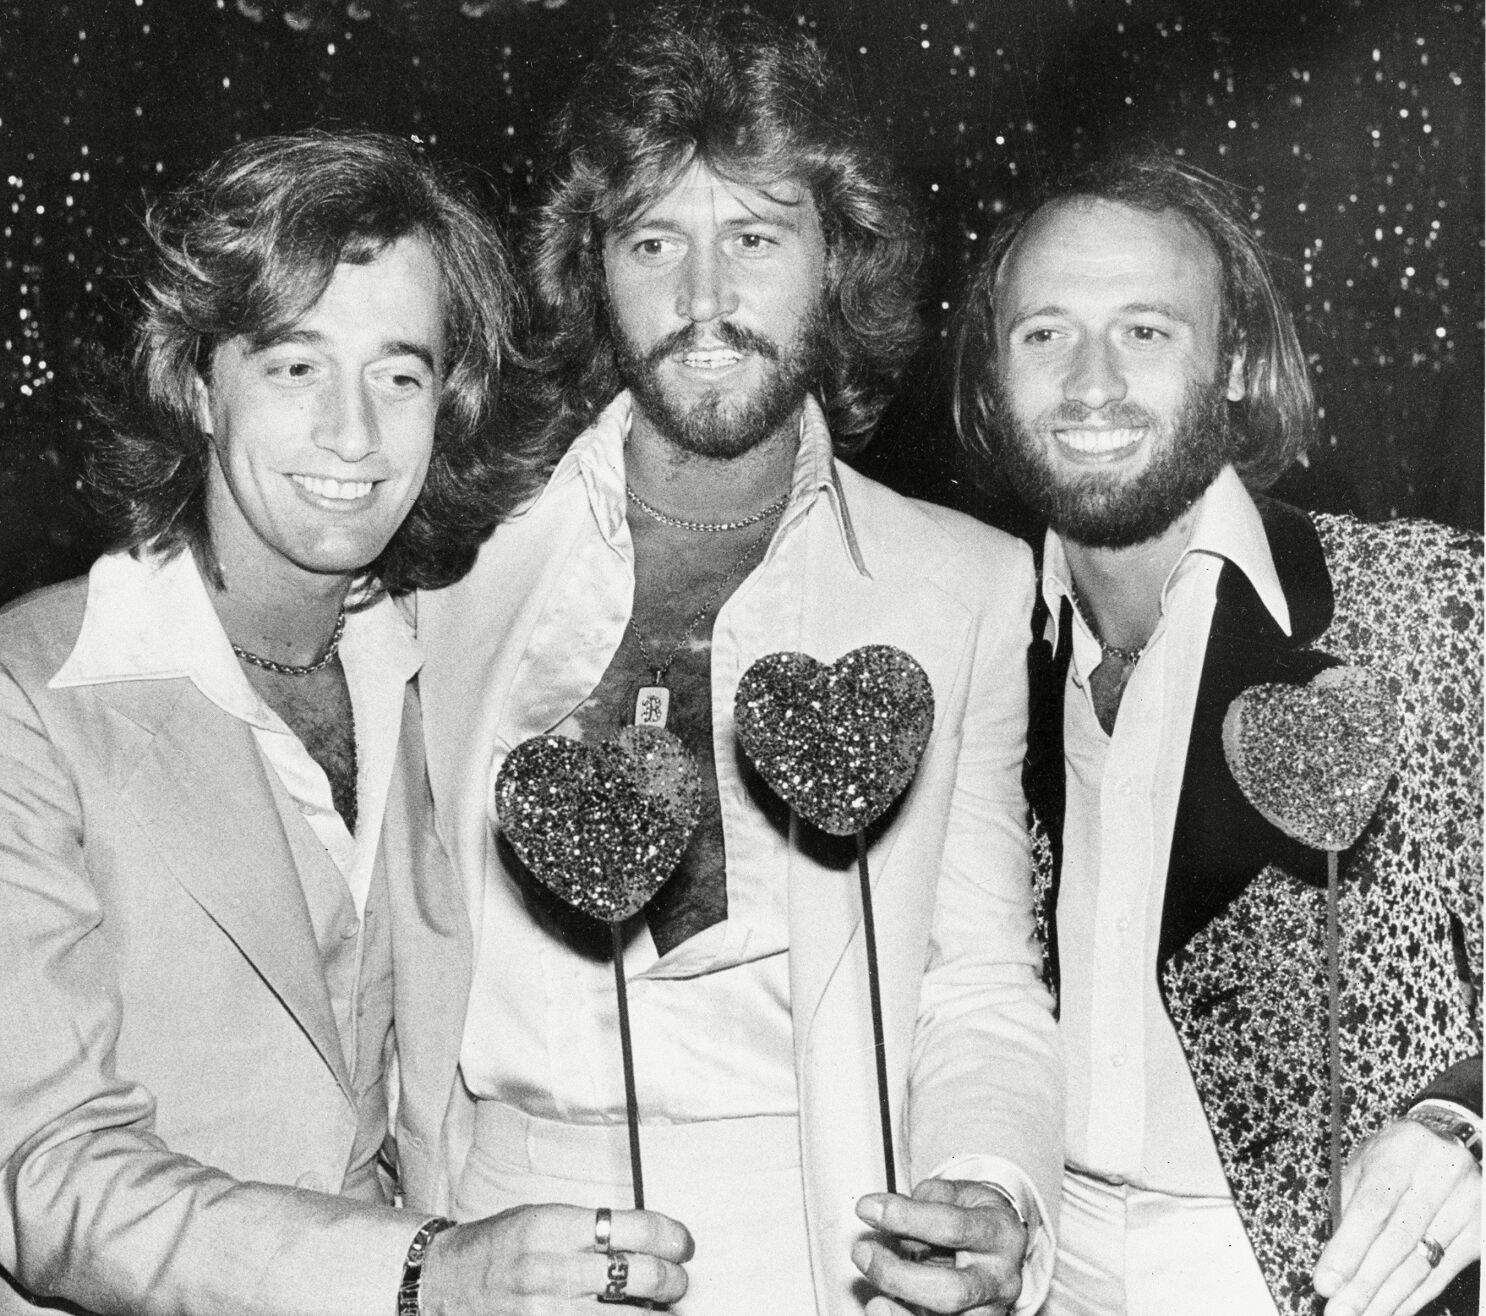 cassette tape of bee gees greatest hits